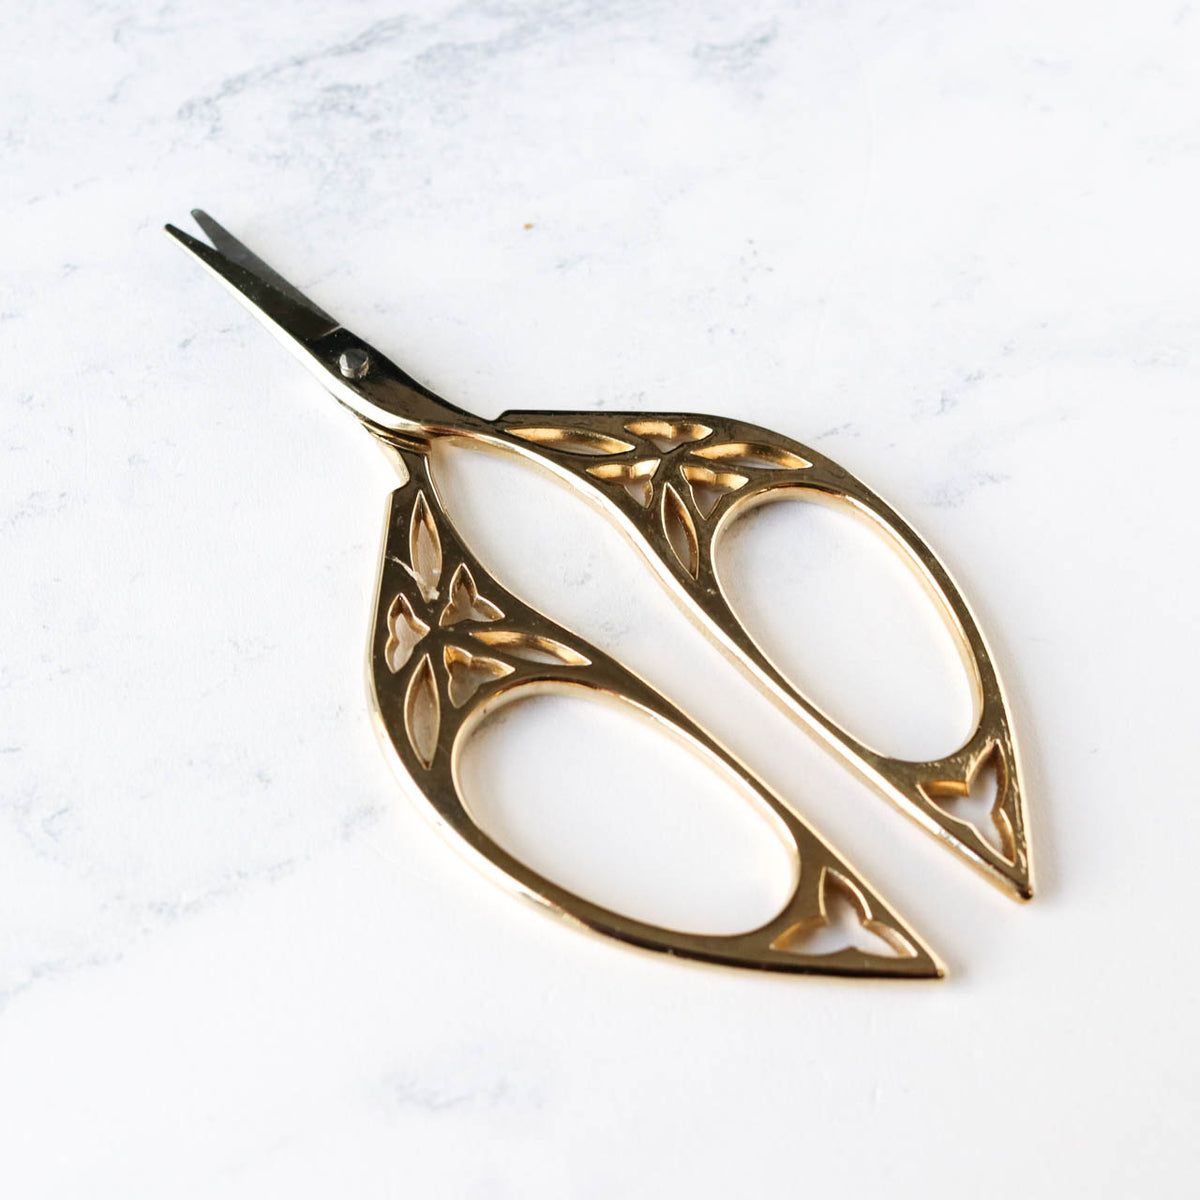 Butterfly Wing Embroidery Scissors